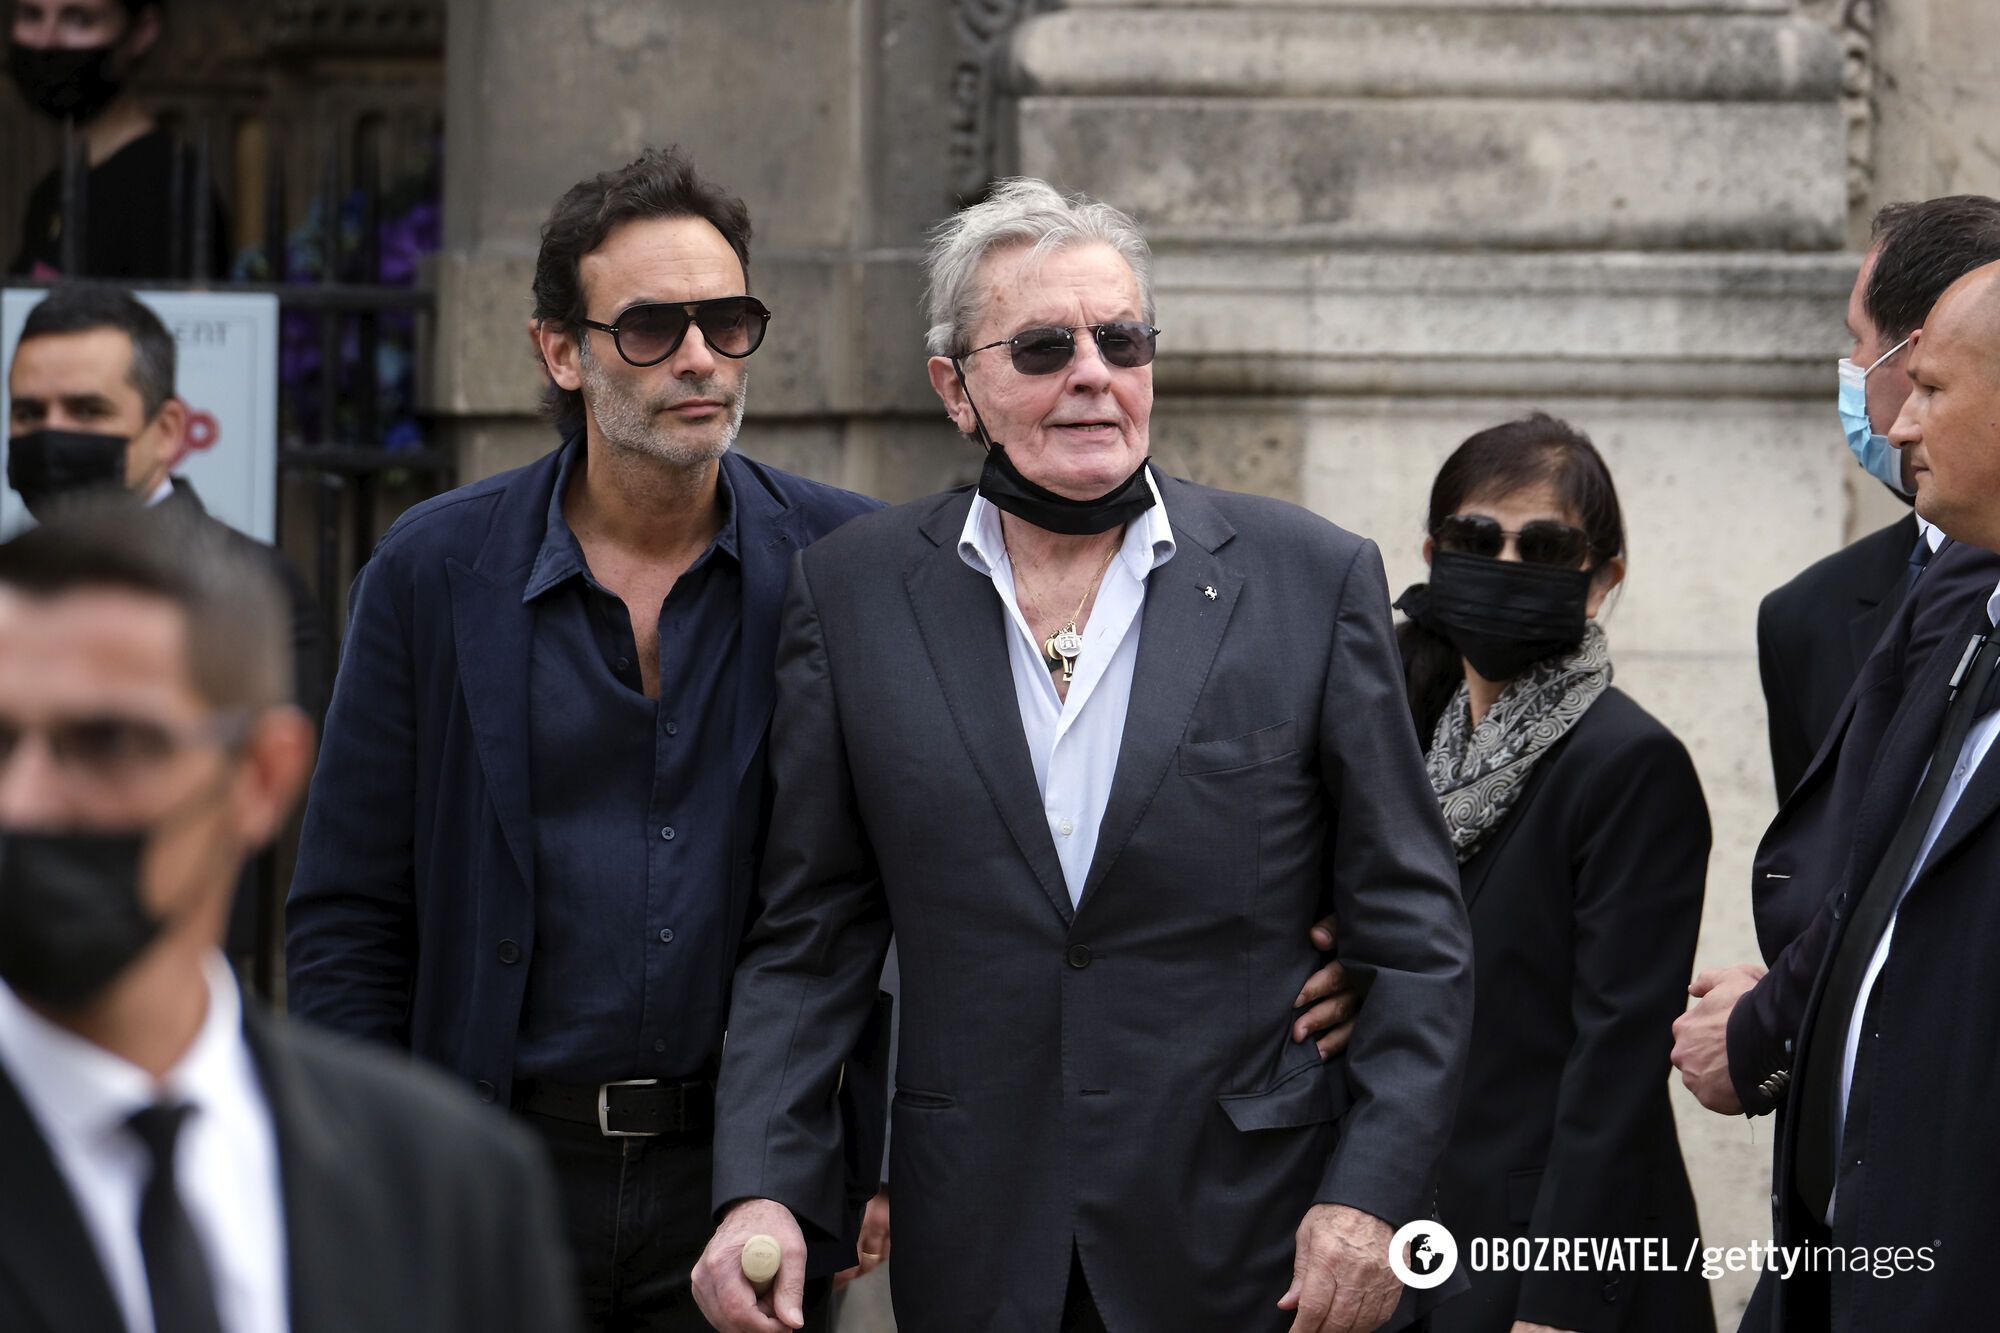 Alain Delon, the sex symbol of French cinema, has been declared incapacitated: the 88-year-old actor's children have been deprived of the right to care for his kids